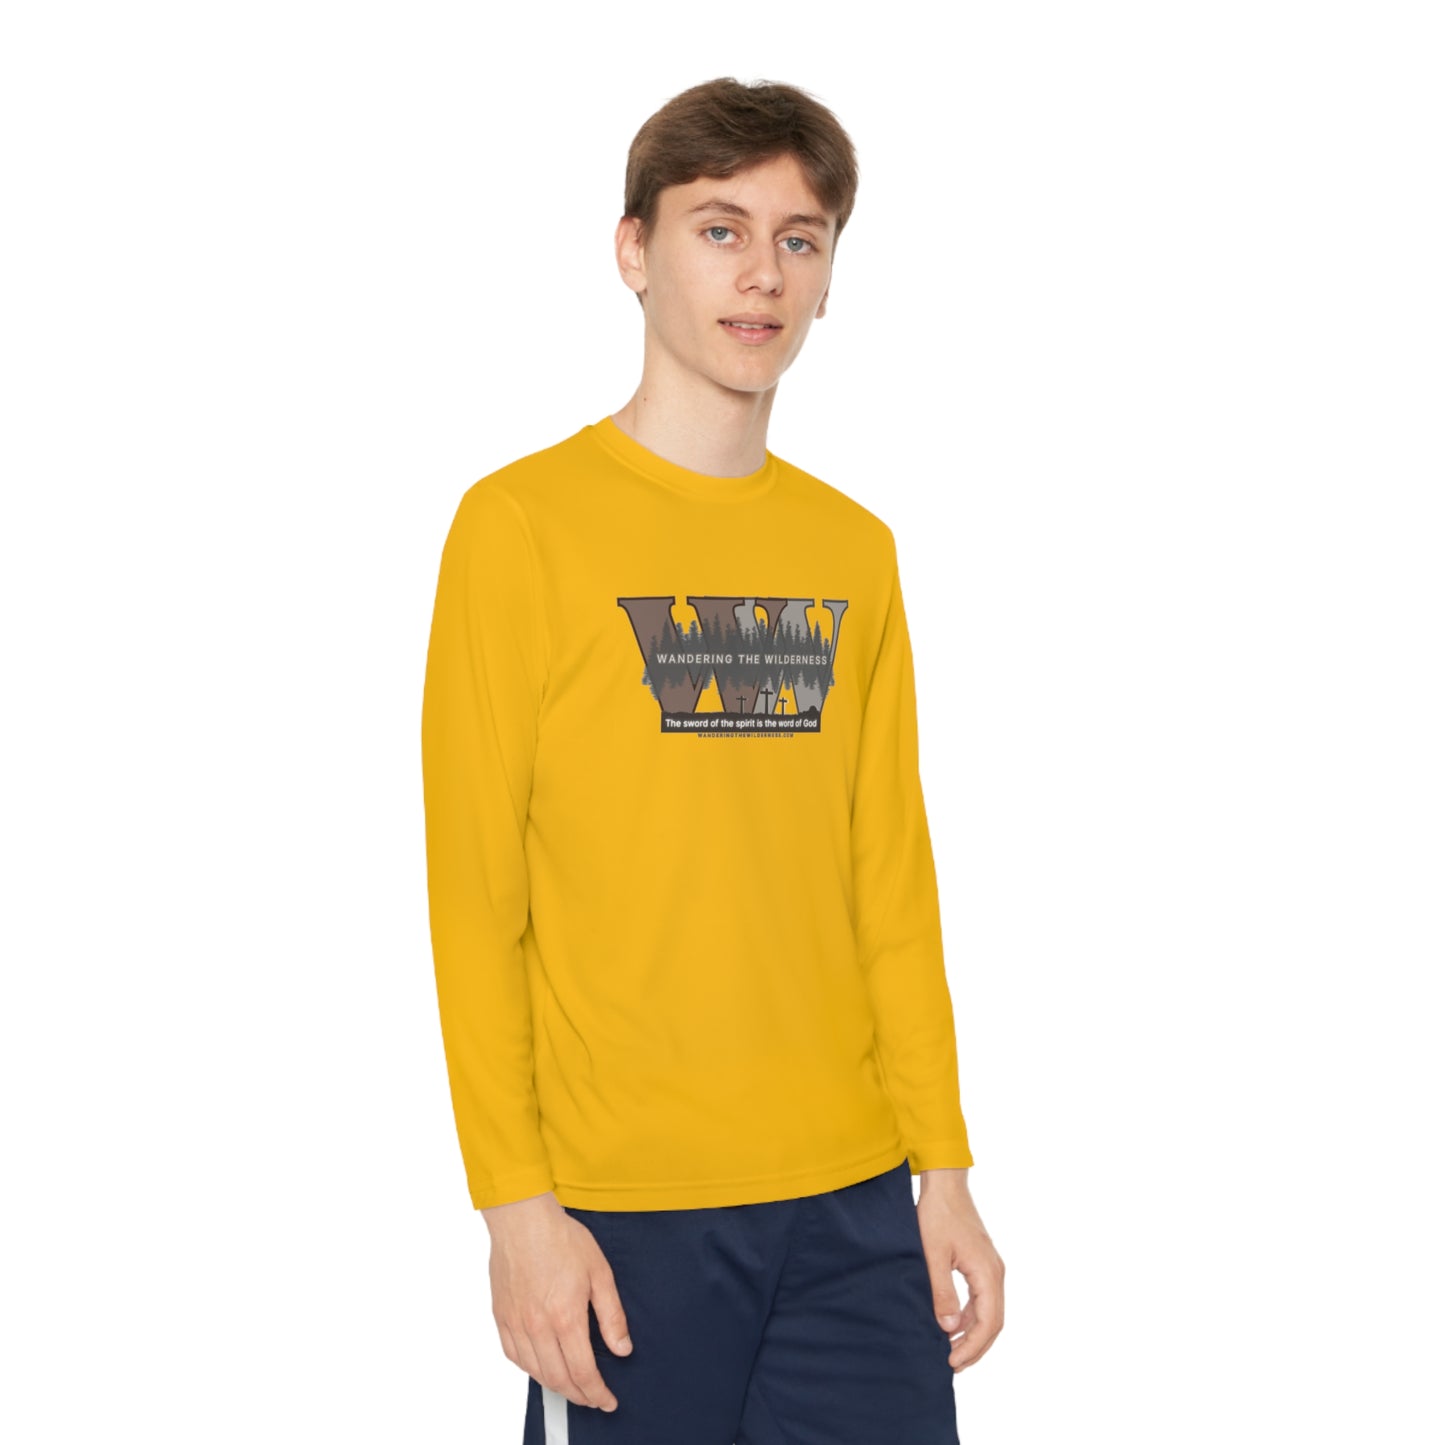 Wandering the Wilderness Kids big logo on front performance long sleeve t-shirt.